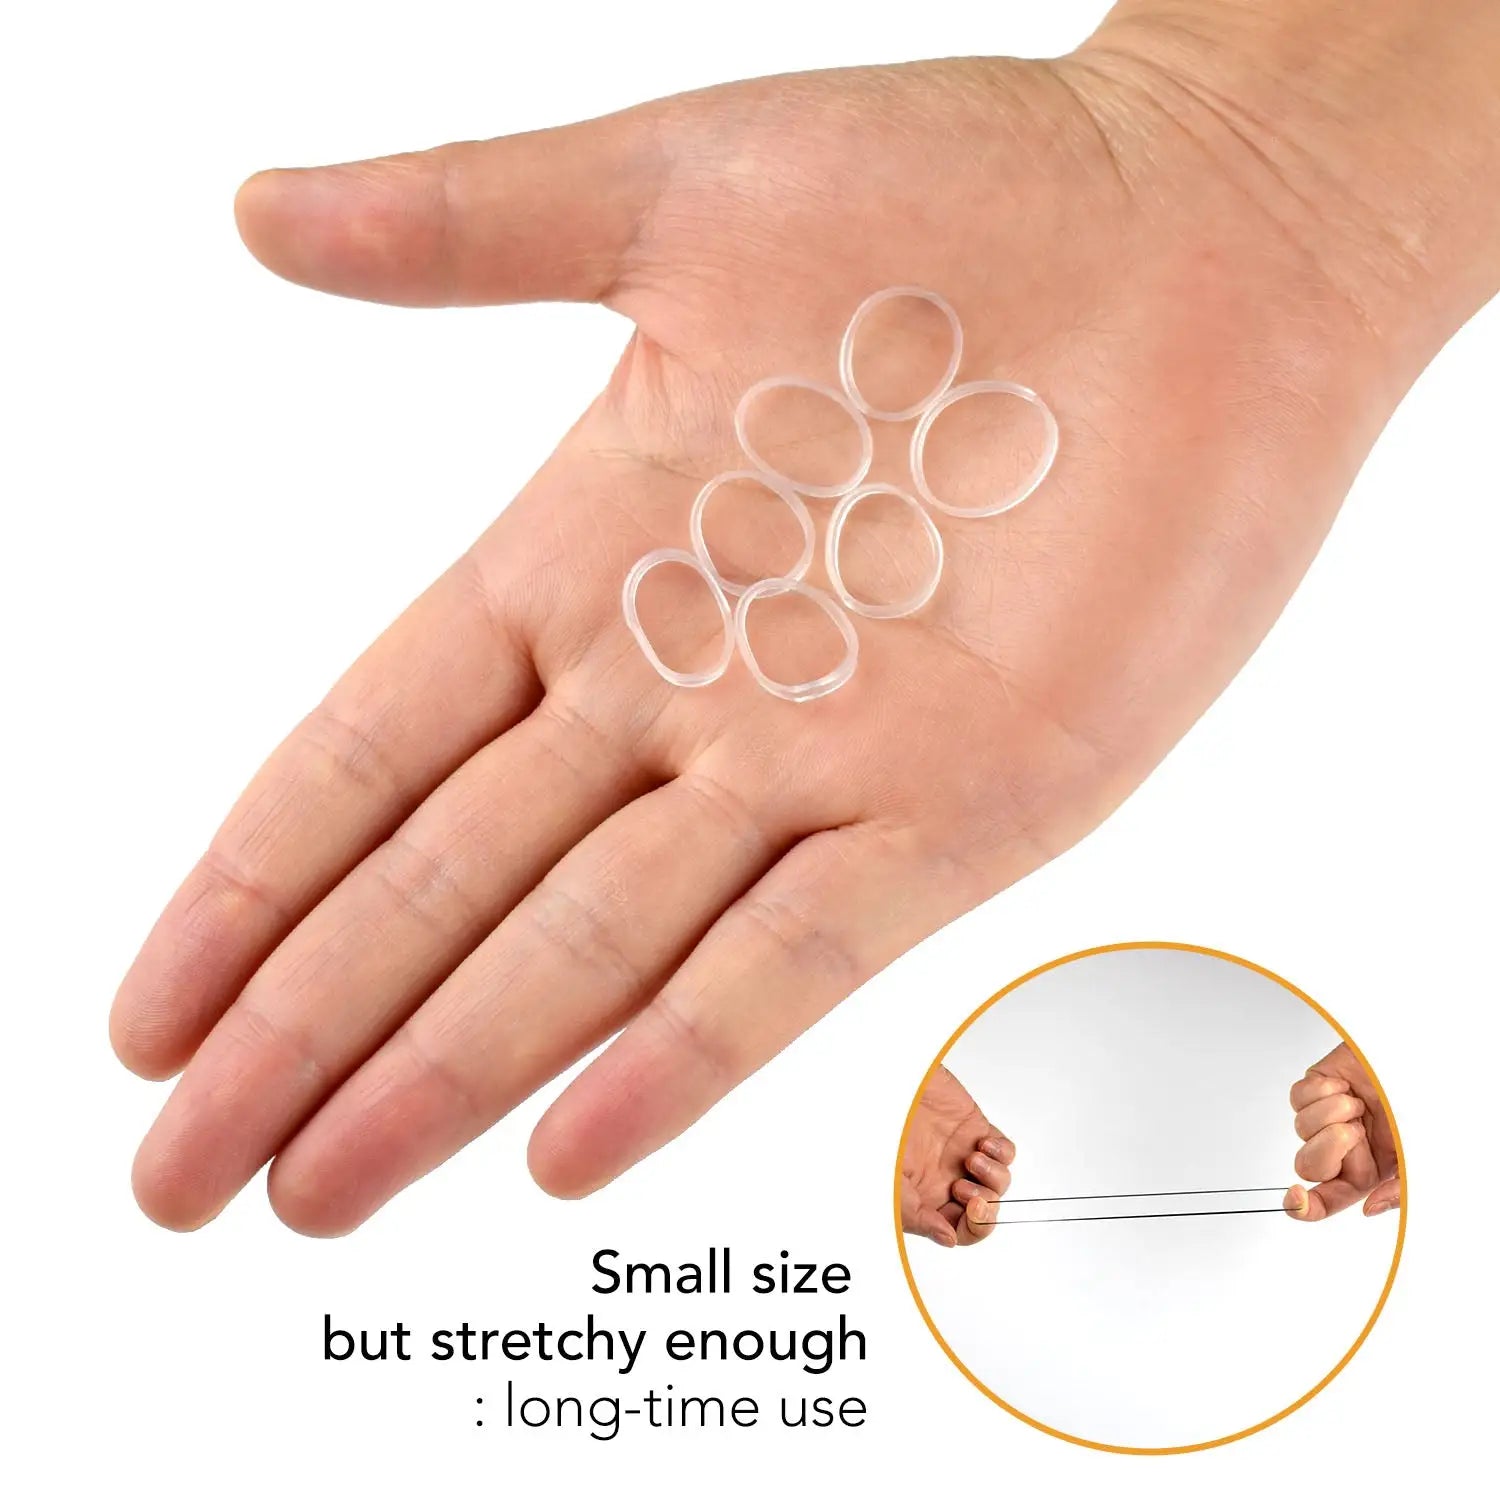 Extra strong mini rubber bands being displayed on a hand with a small plastic finger ring.